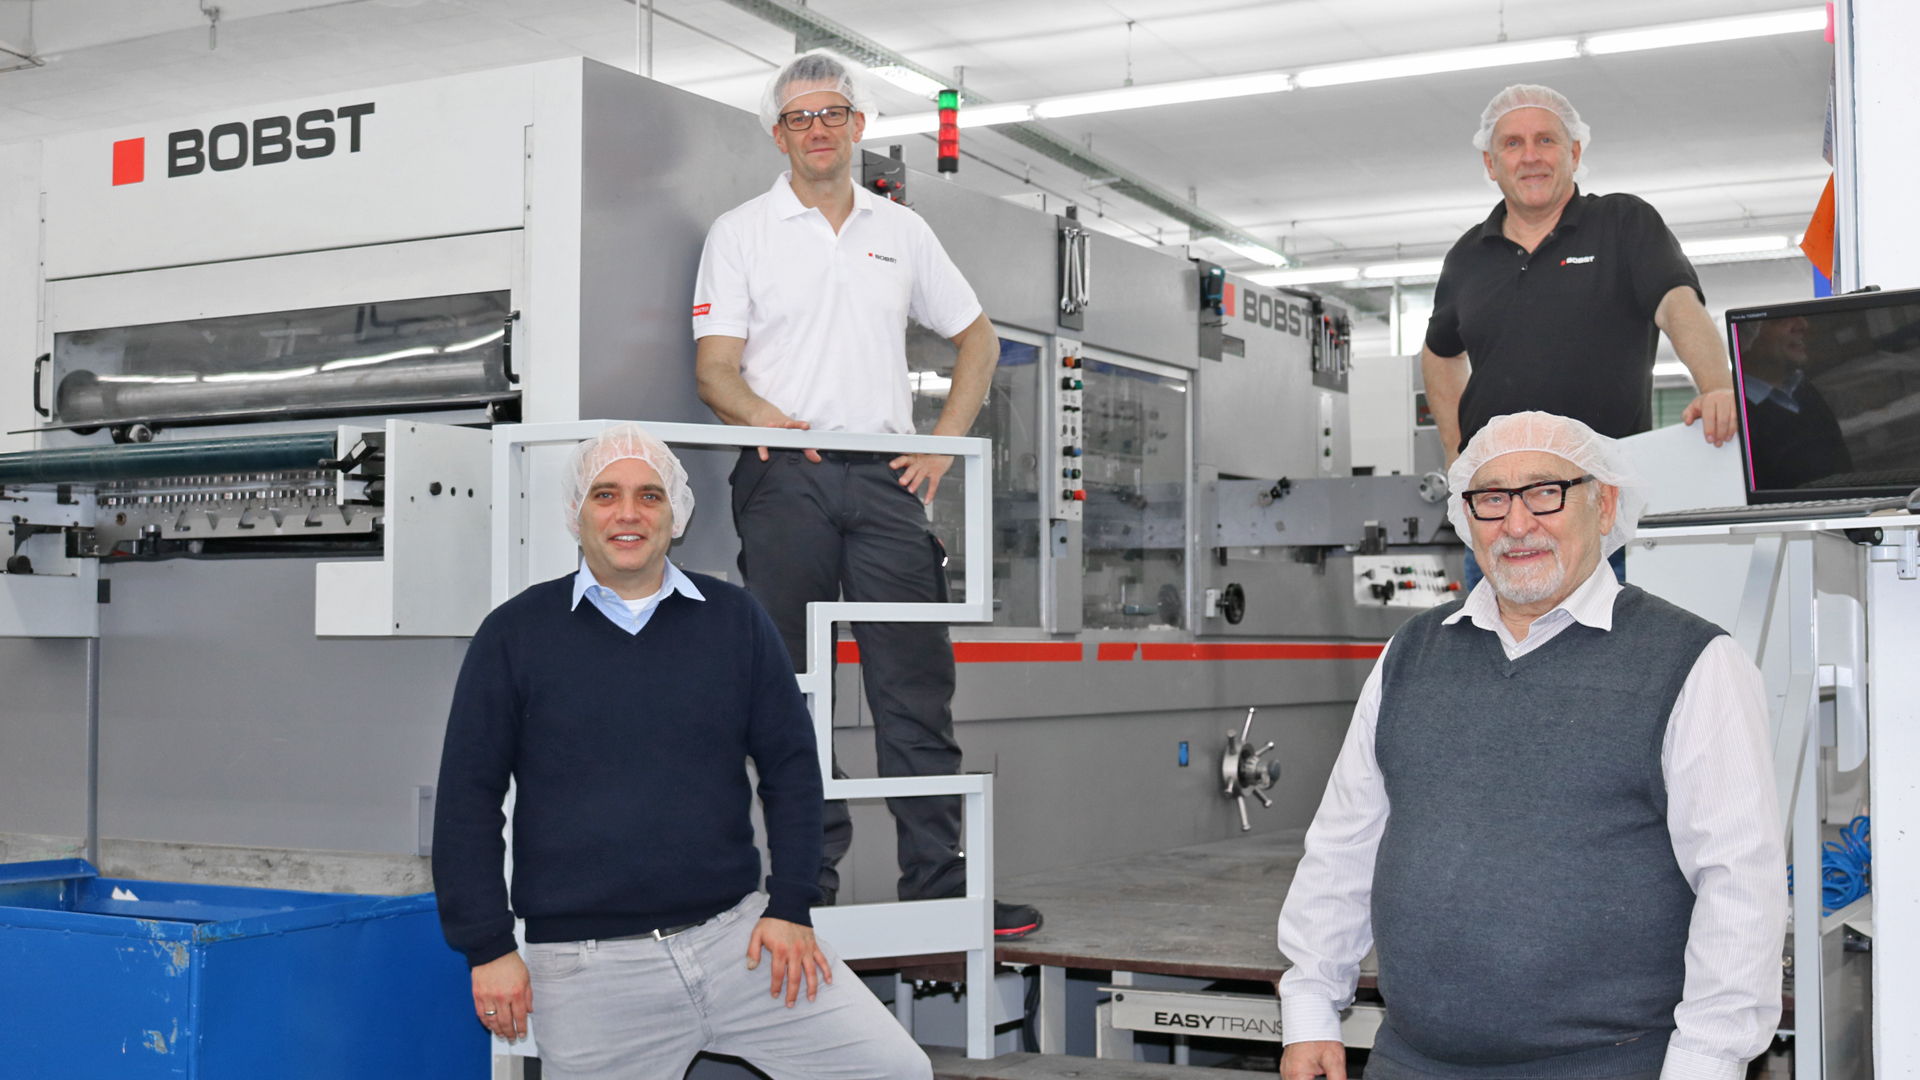 The team that jointly planned and implemented process optimization at Spiegel Verpackungen:Senior Director Martin Spiegel (below right), Managing Director Michael Spiegel (below left), Manfred Wöhning, responsible for process optimization, training and the Competence Center at Bobst Meerbusch (top right), and Thomas Neumeister, Process Specialist at Bobst Meerbusch (top left).